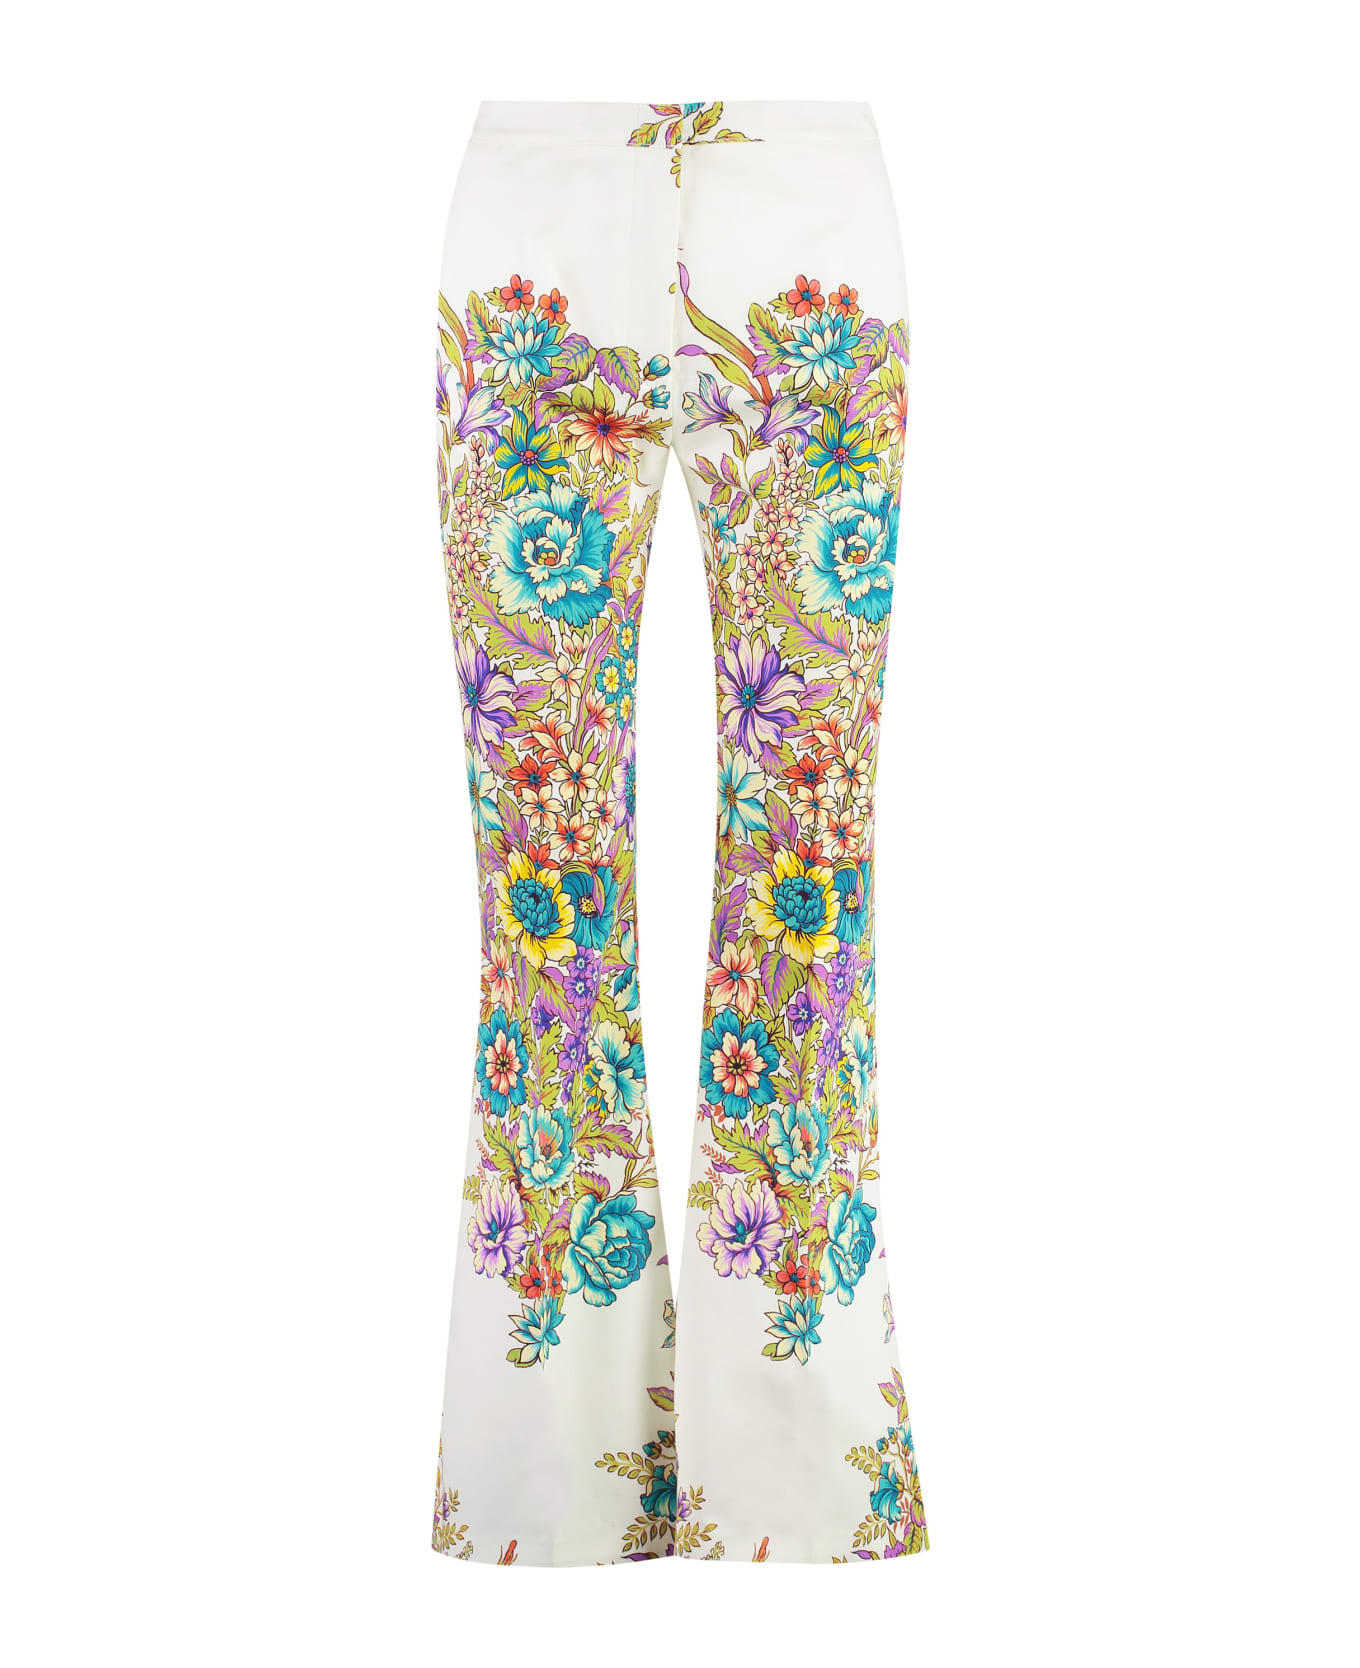 Etro Stretch Cotton Trousers - Ivory